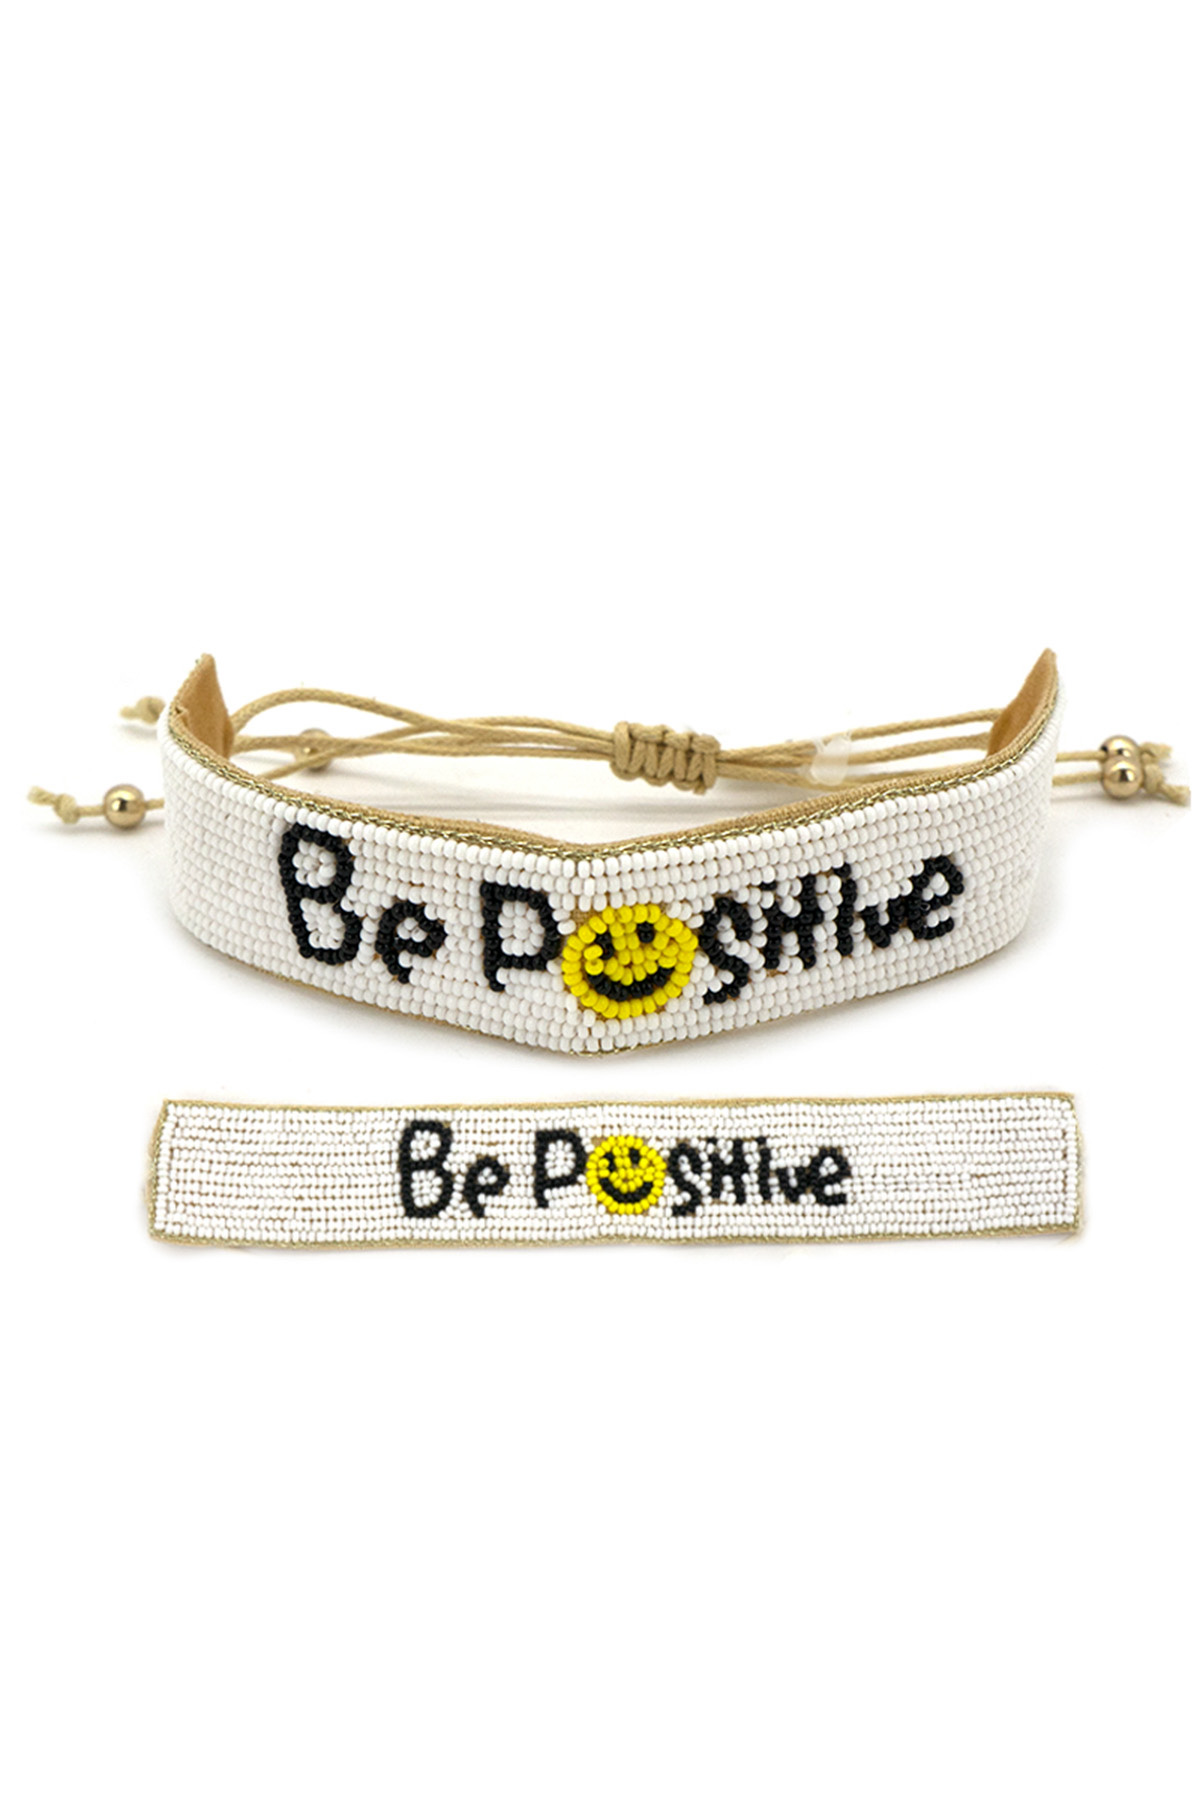 BE POSITIVE HAPPY FACE SEED BEAD ADJUSTABLE BRACELET